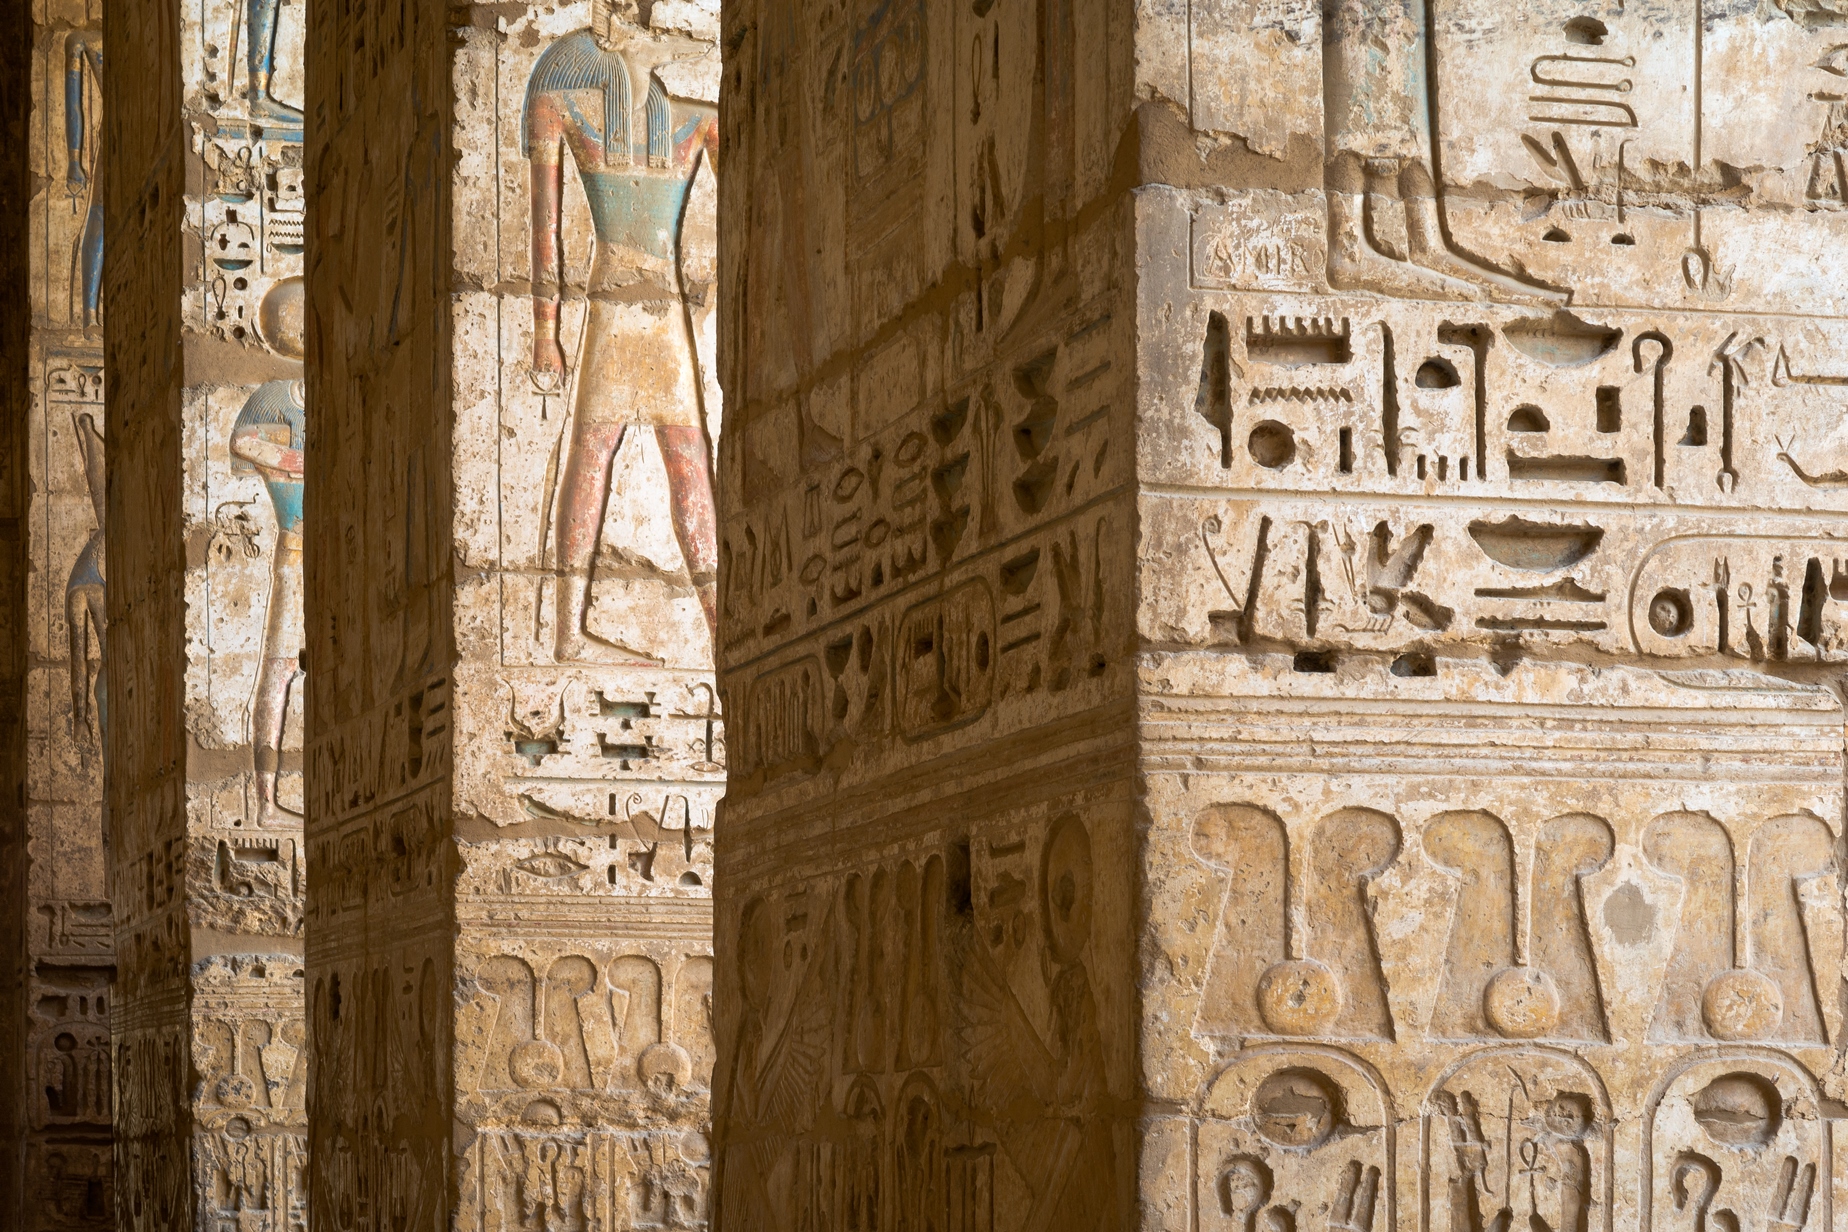 Hieroglyphs on a column at a temple in Egypt